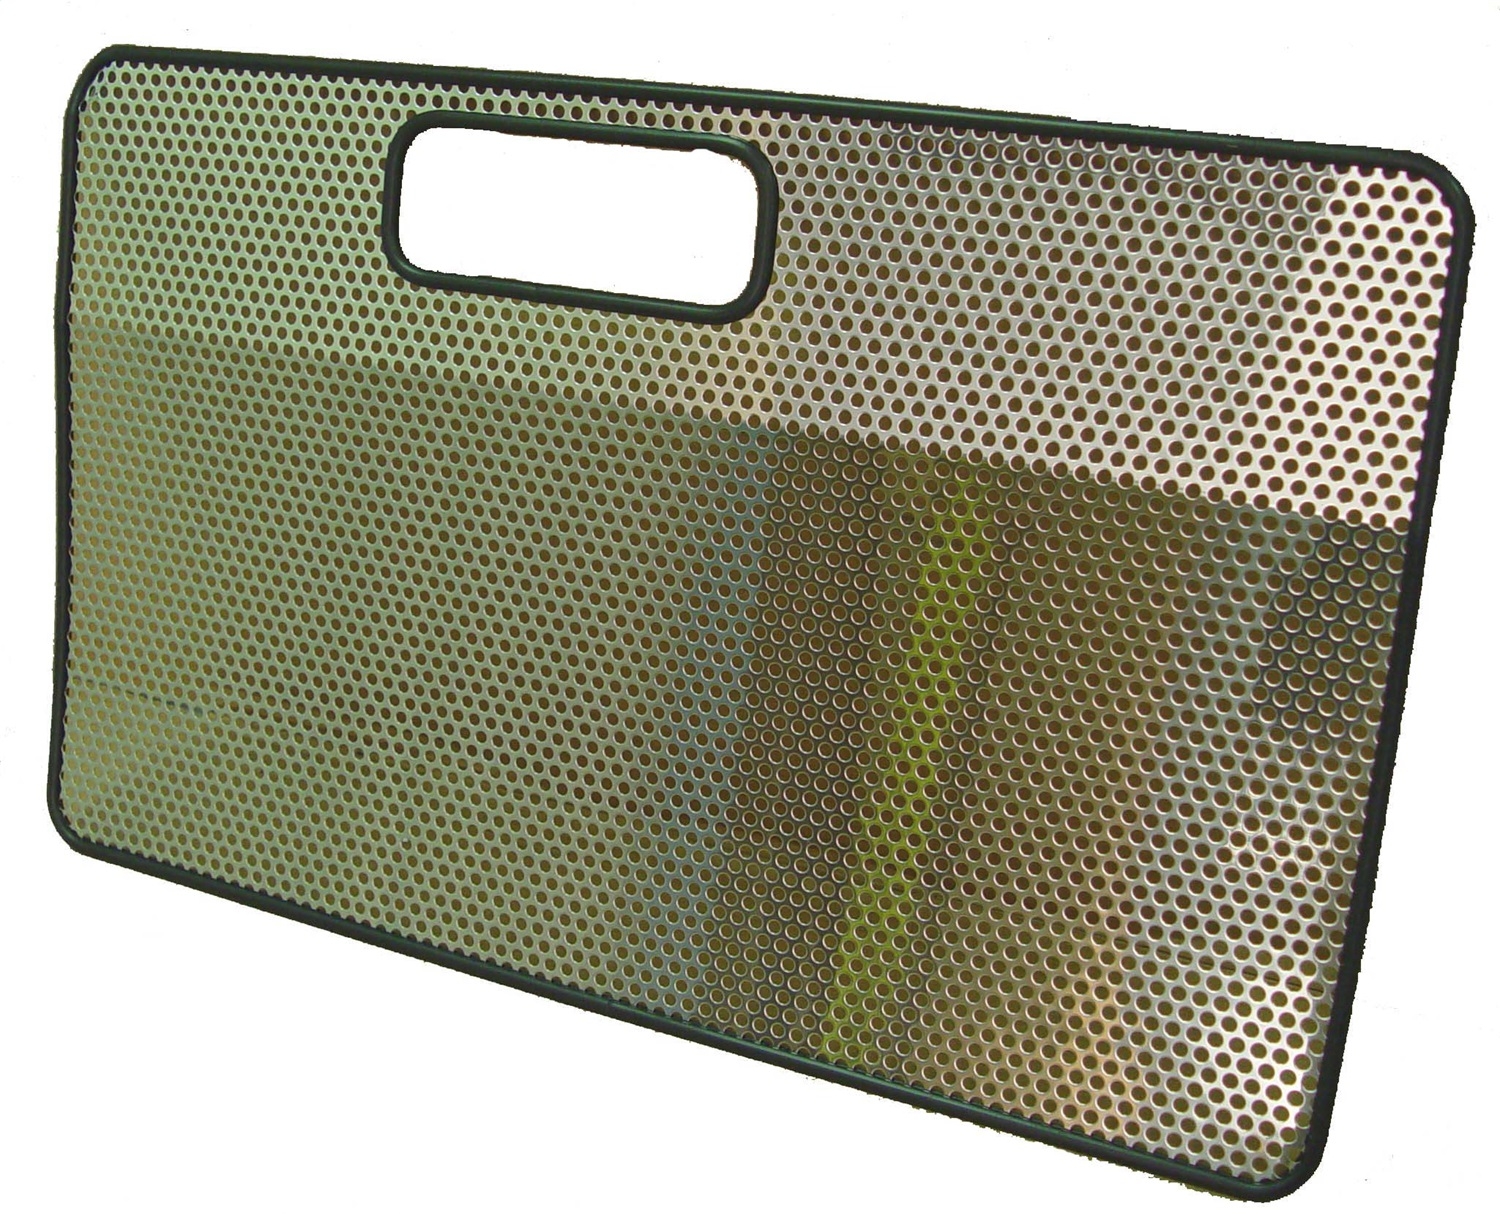 Rugged Ridge This Durable Radiator Bug Shield From Rugged Ridge Fits 97-06 Jeep Wrangler Tj And